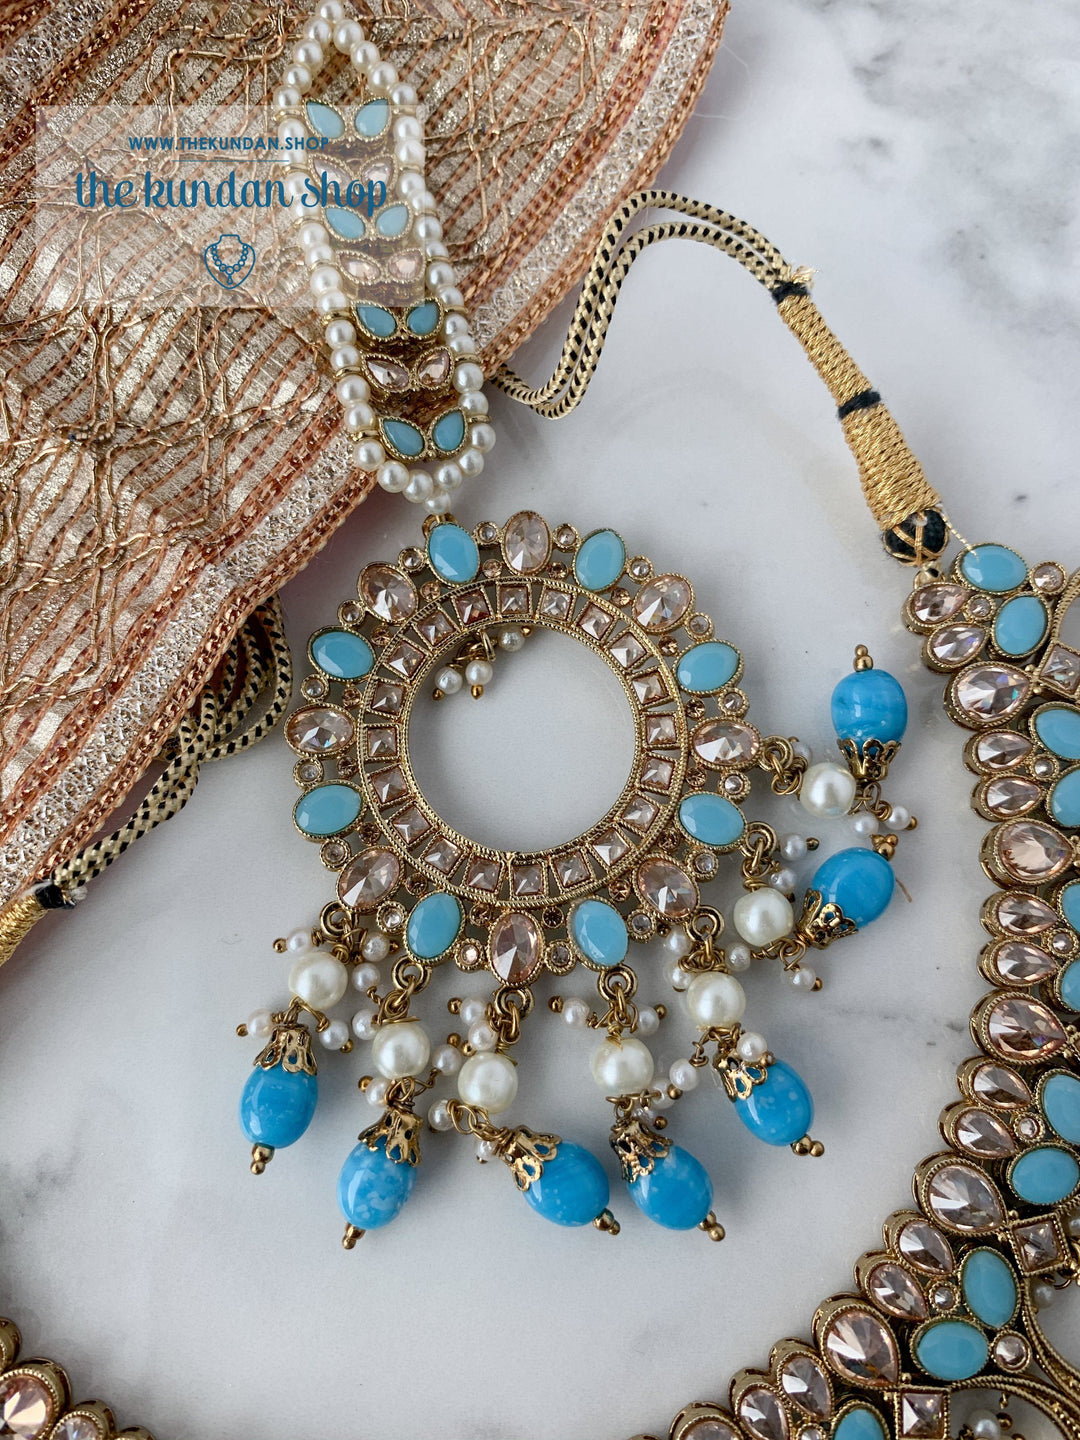 Miracle in Feroza Blue Necklace Sets THE KUNDAN SHOP 